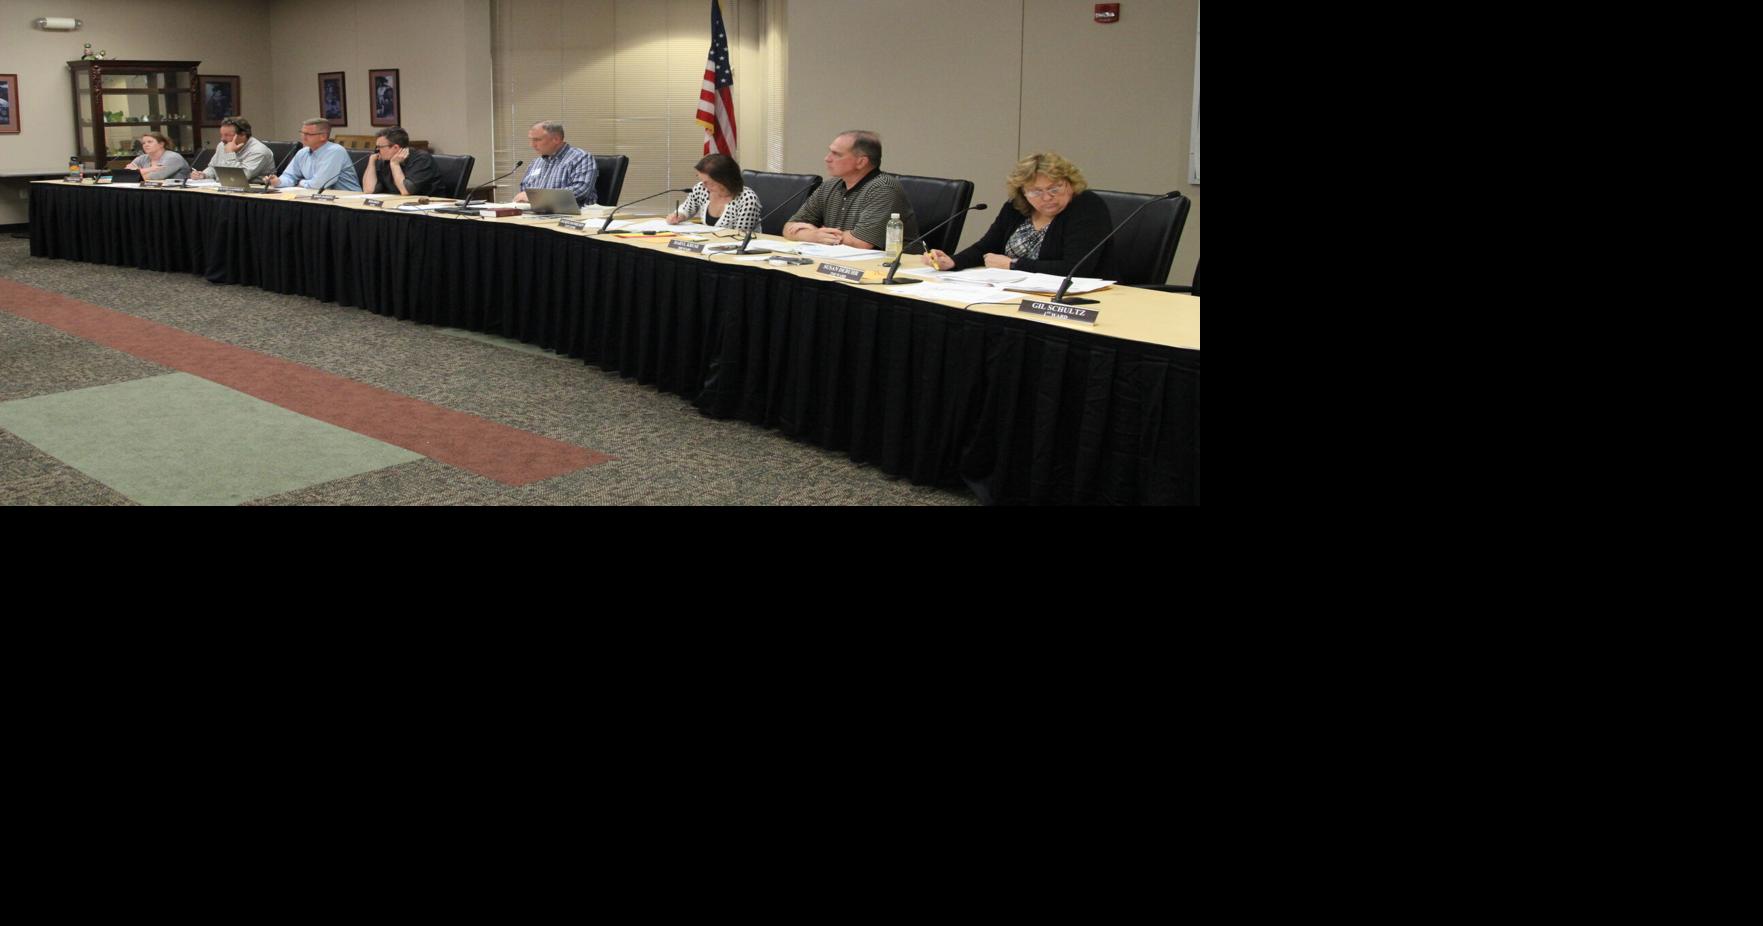 Bond sales up to $4.5 million approved by Cedar Falls City Council